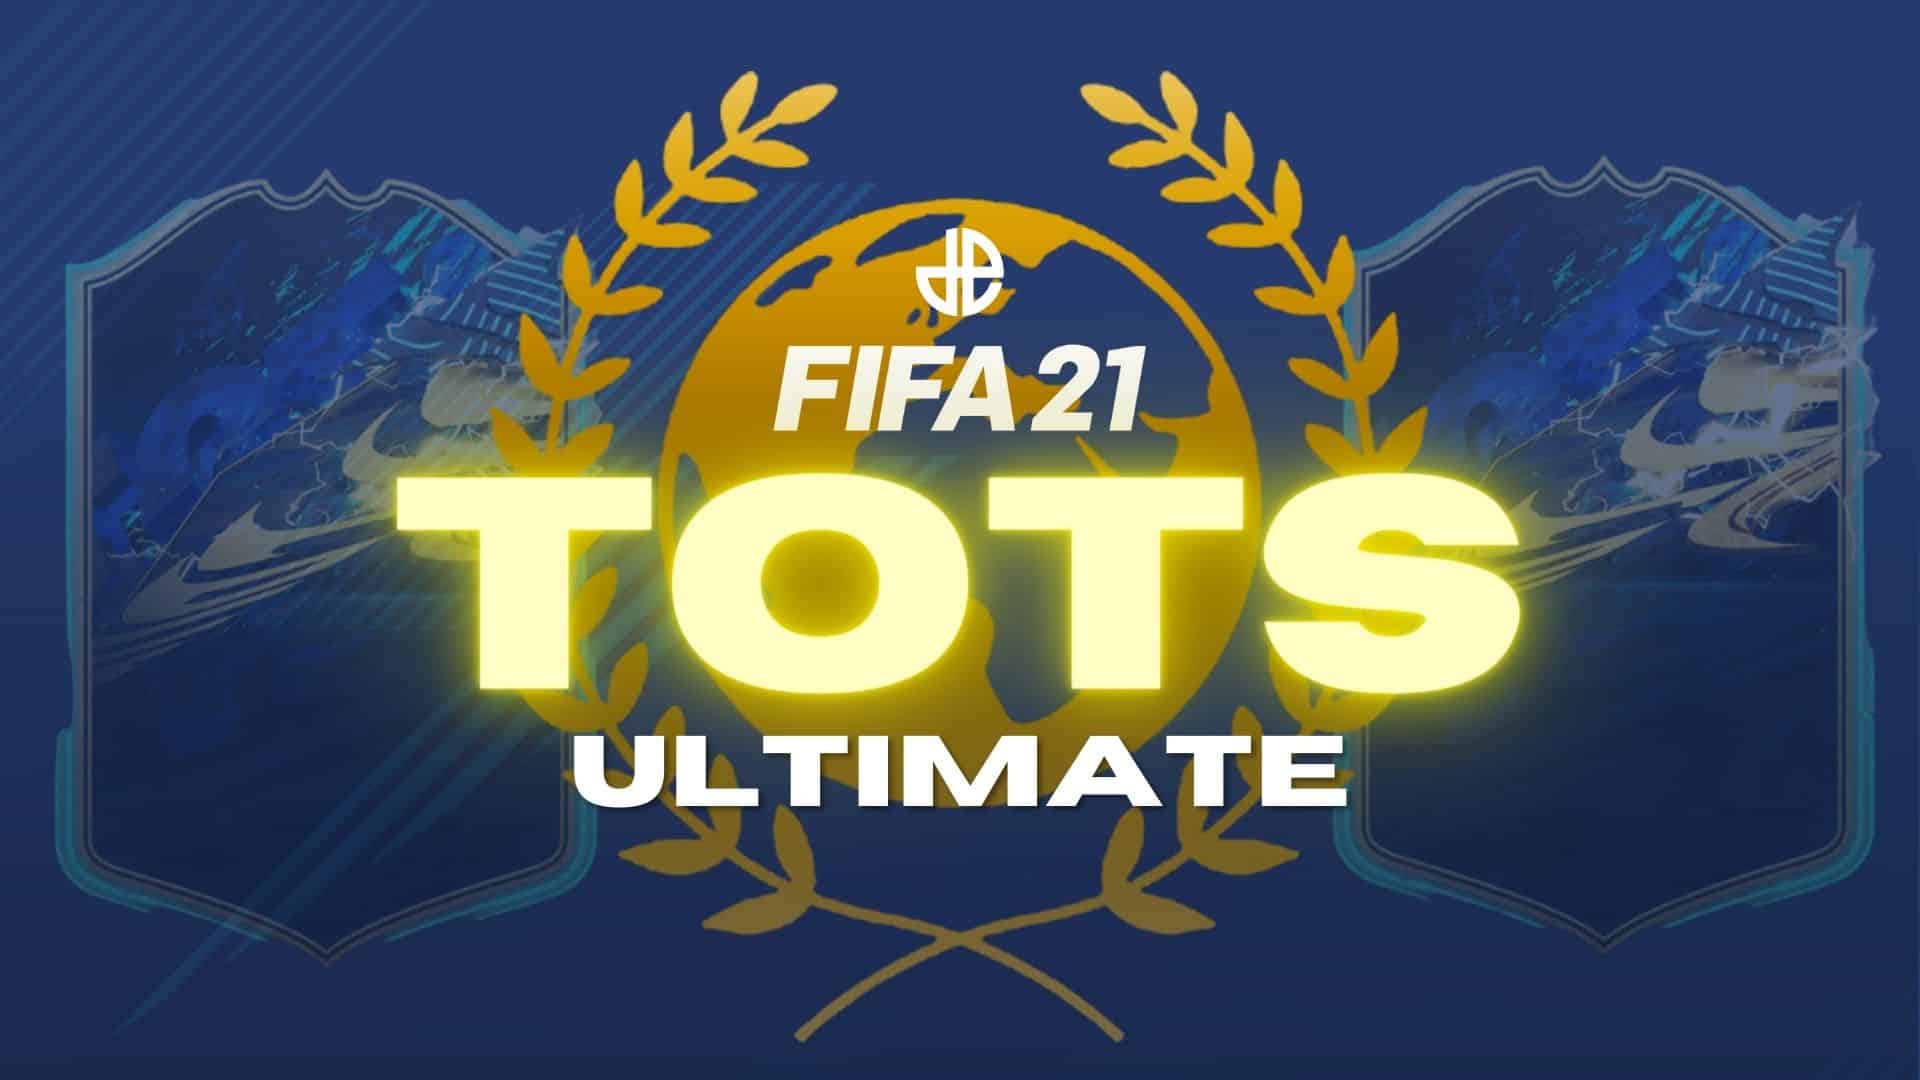 FIFA 21 Ultimate Team of the Season lineup predictions leaks revealed.